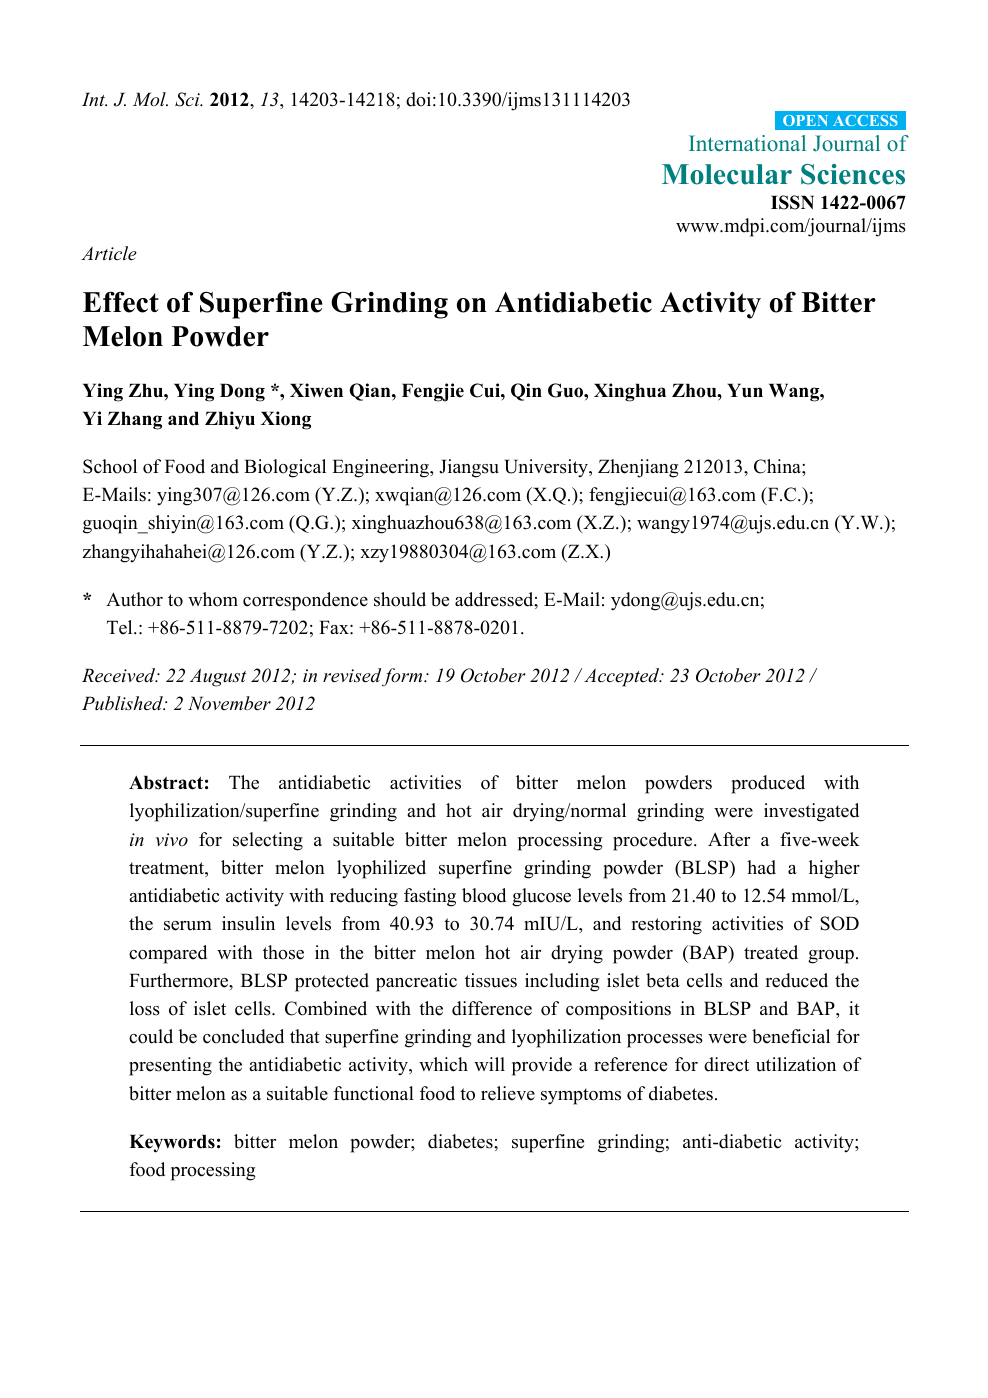 Effect Of Superfine Grinding On Antidiabetic Activity Of Bitter Melon Powder Topic Of Research Paper In Biological Sciences Download Scholarly Article Pdf And Read For Free On Cyberleninka Open Science Hub